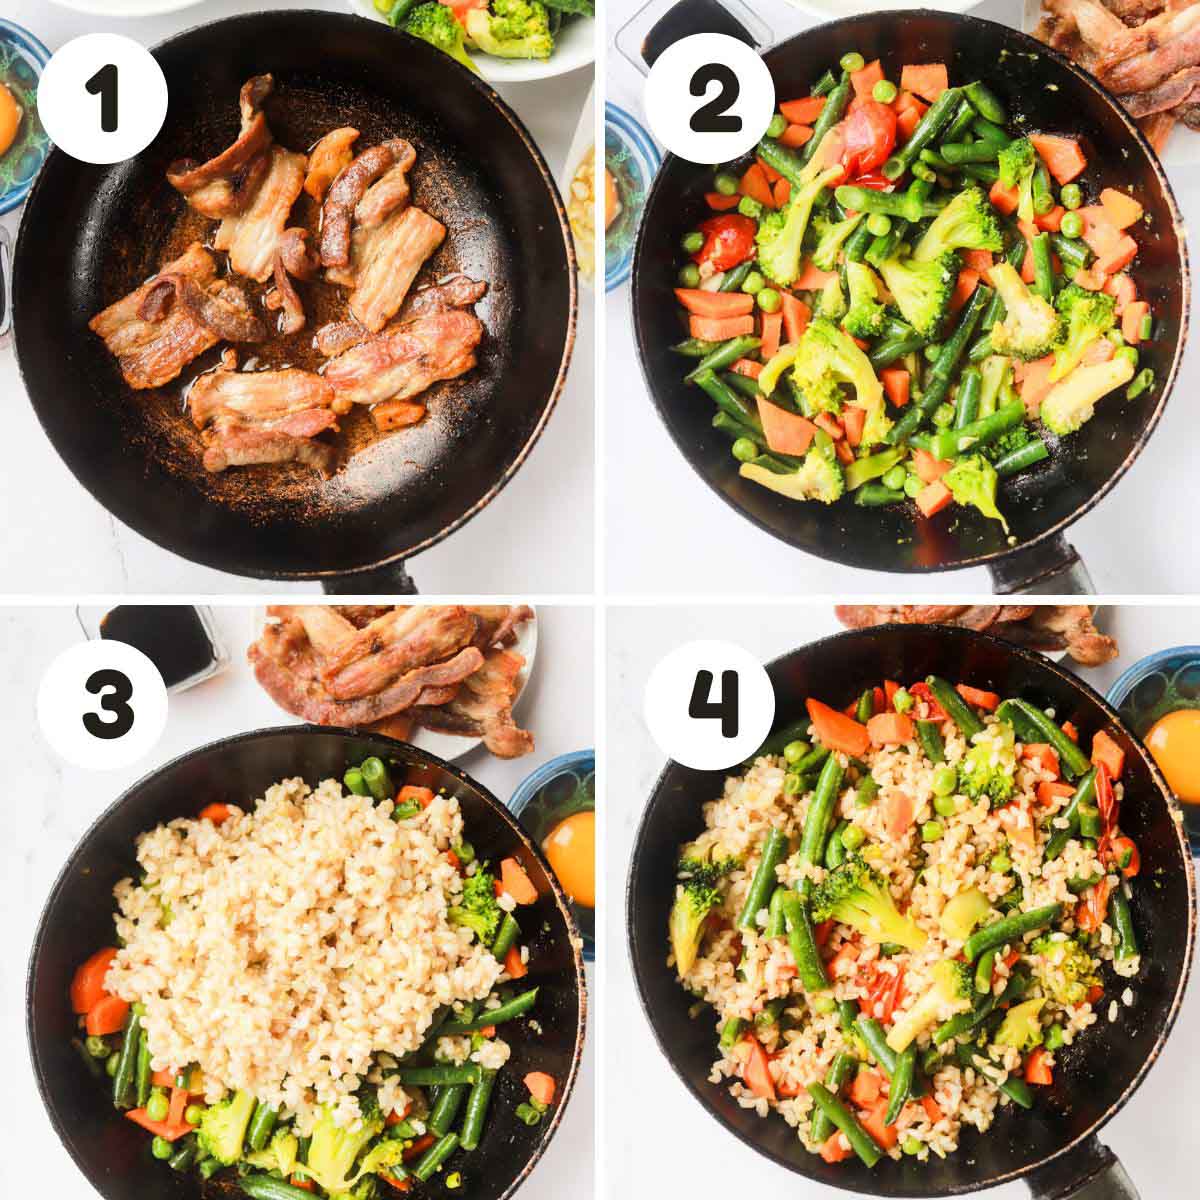 Steps to make the fried rice.